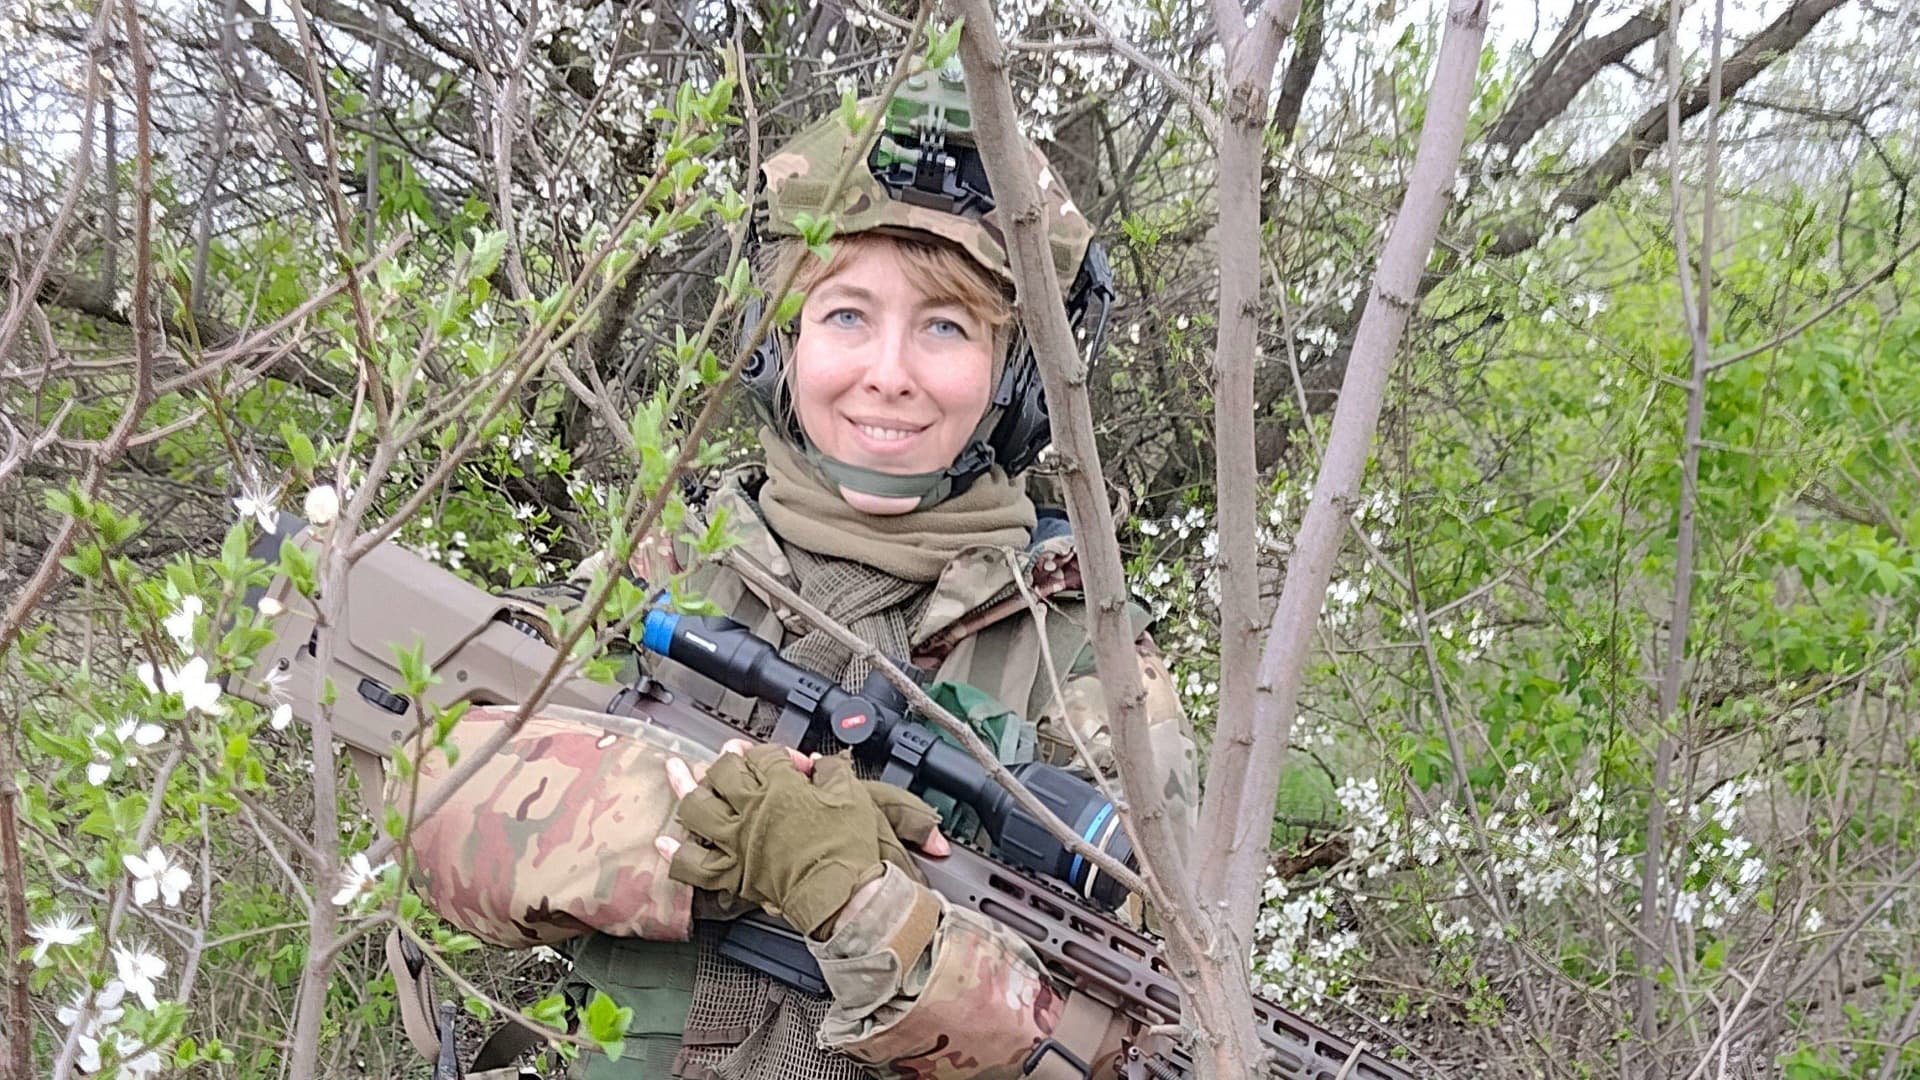 Olena Bilozerska, a Ukrainian journalist who became a sniper in 2014. Bilozerska has raised the profile of female soldiers in Ukraine and has become a target of Russian propaganda, falsely declared dead a number of times.